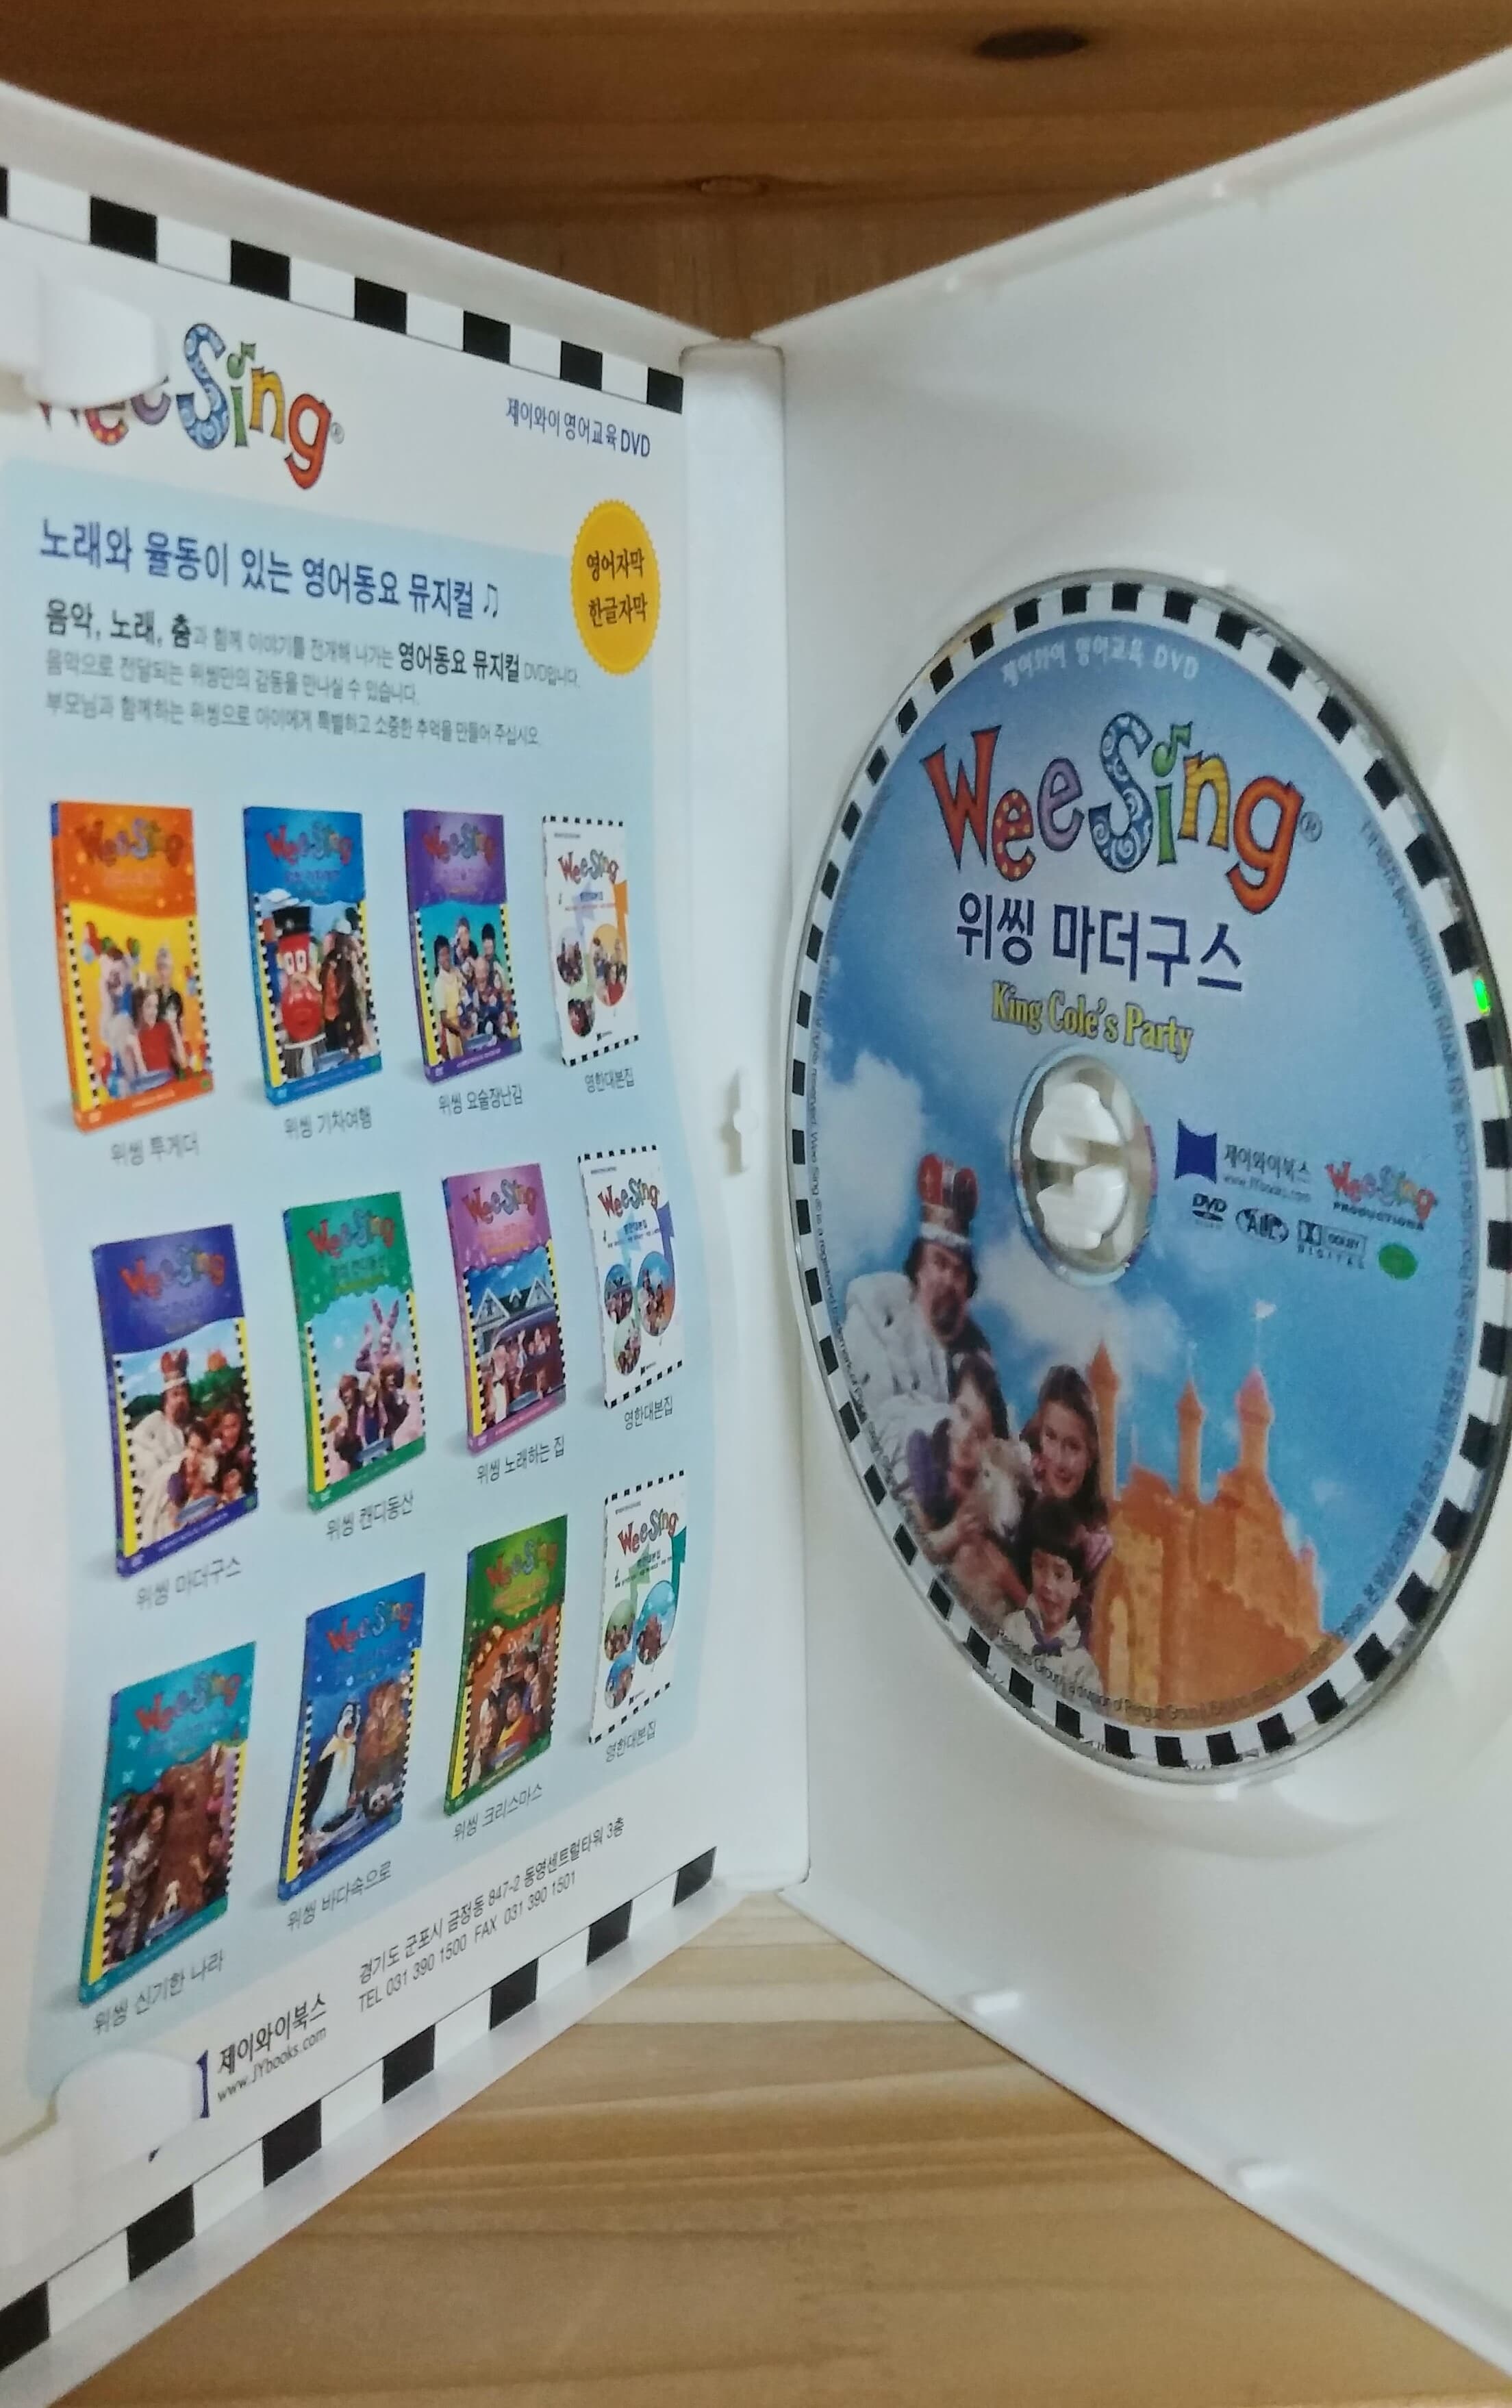 Wee Sing DVD [마더구스] : King Cole's Party